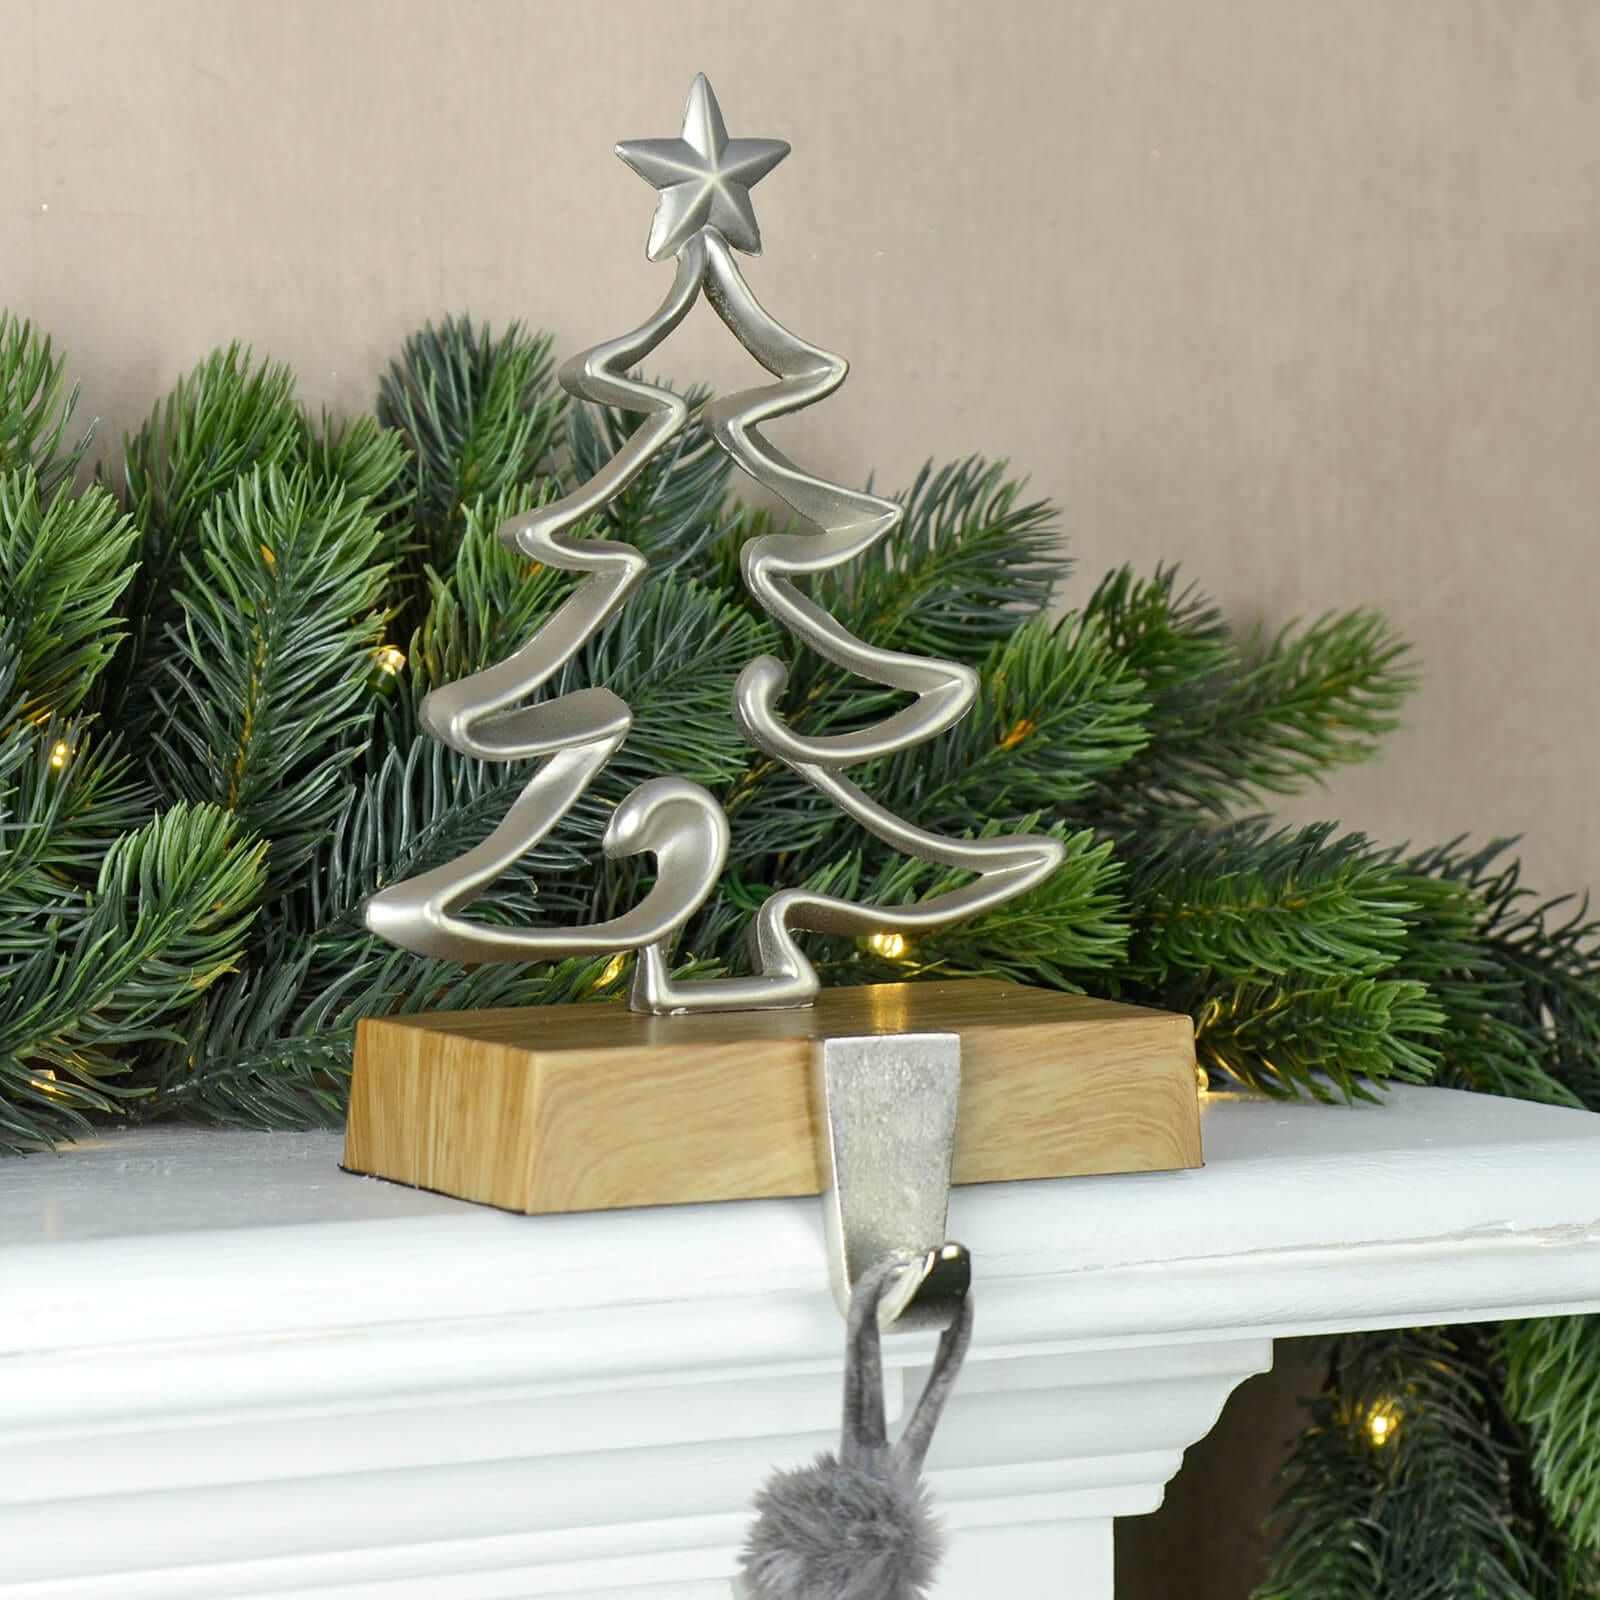 Mr Crimbo tree shaped silver metal Christmas stocking holder with star on a mantelpiece with Christmas garland